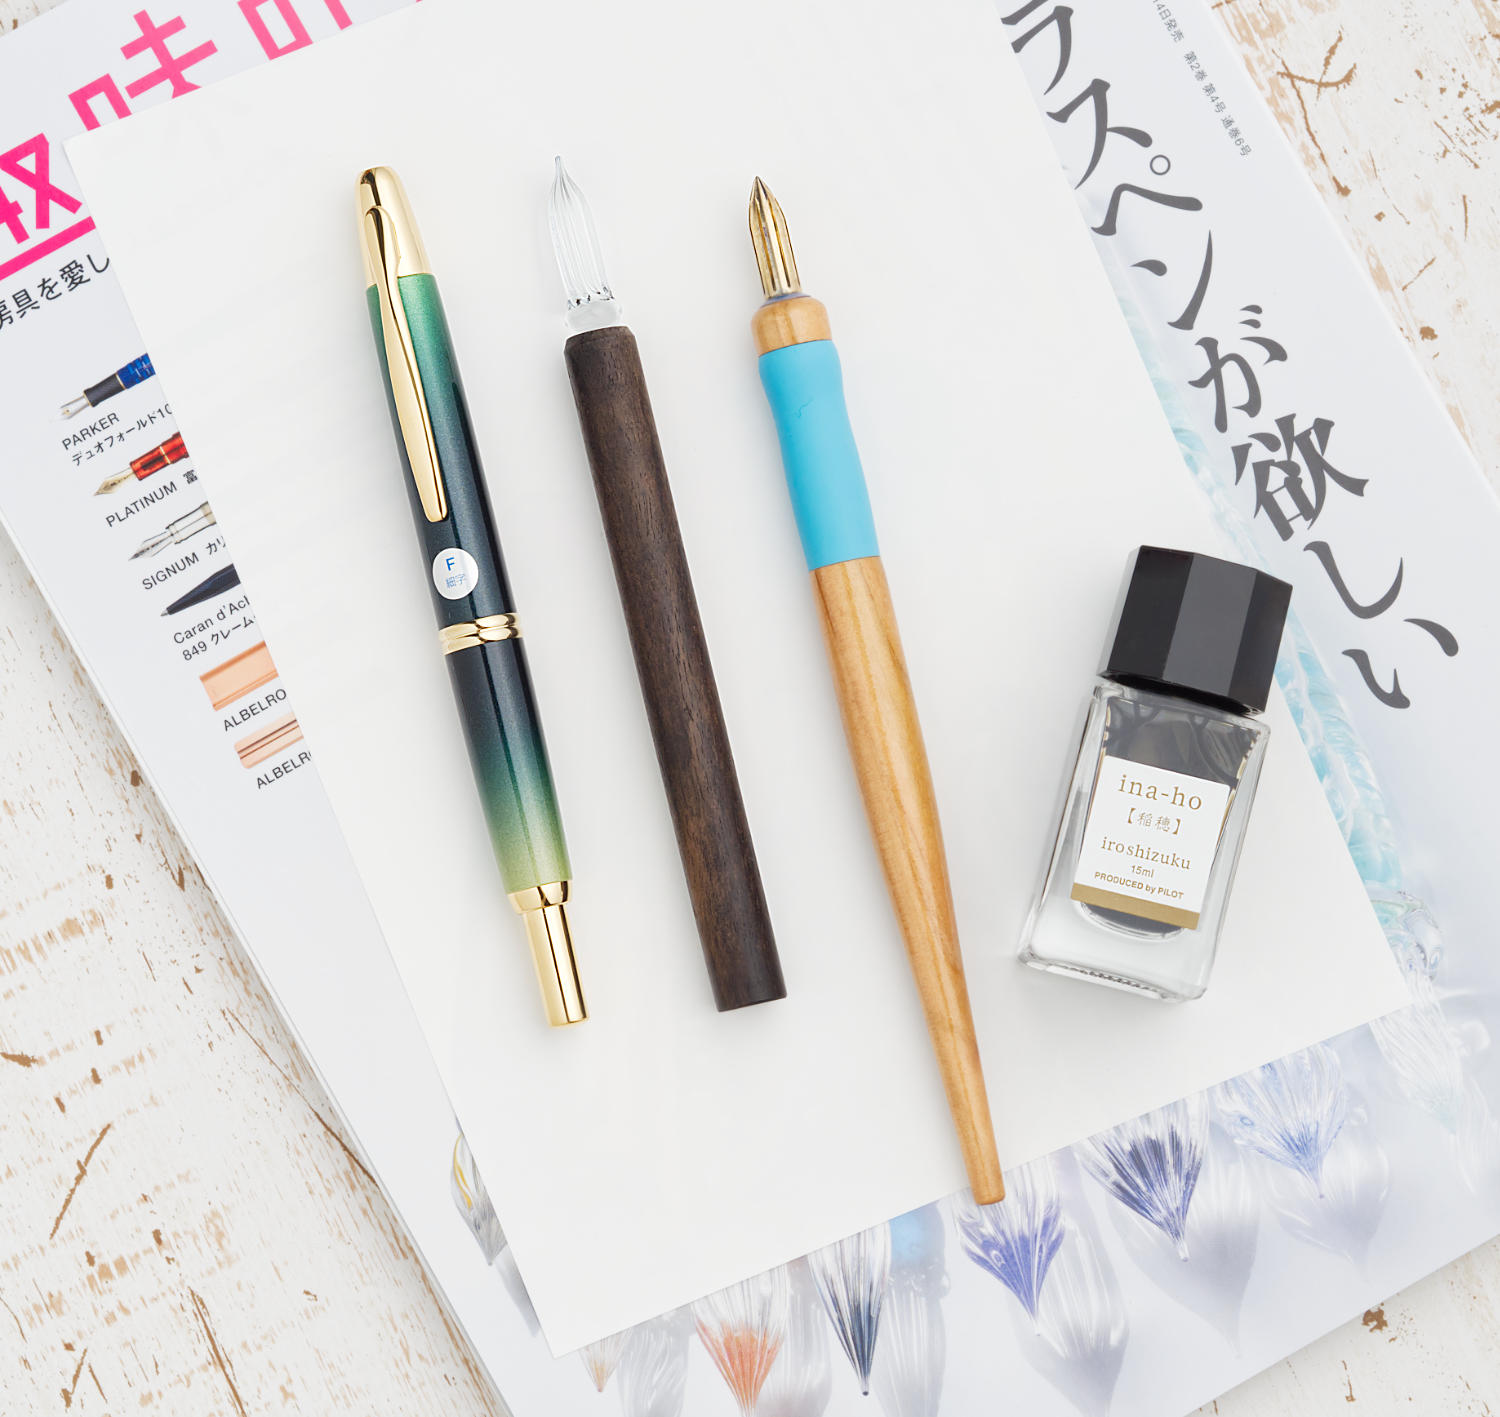 image from Japan pen trends in 2021